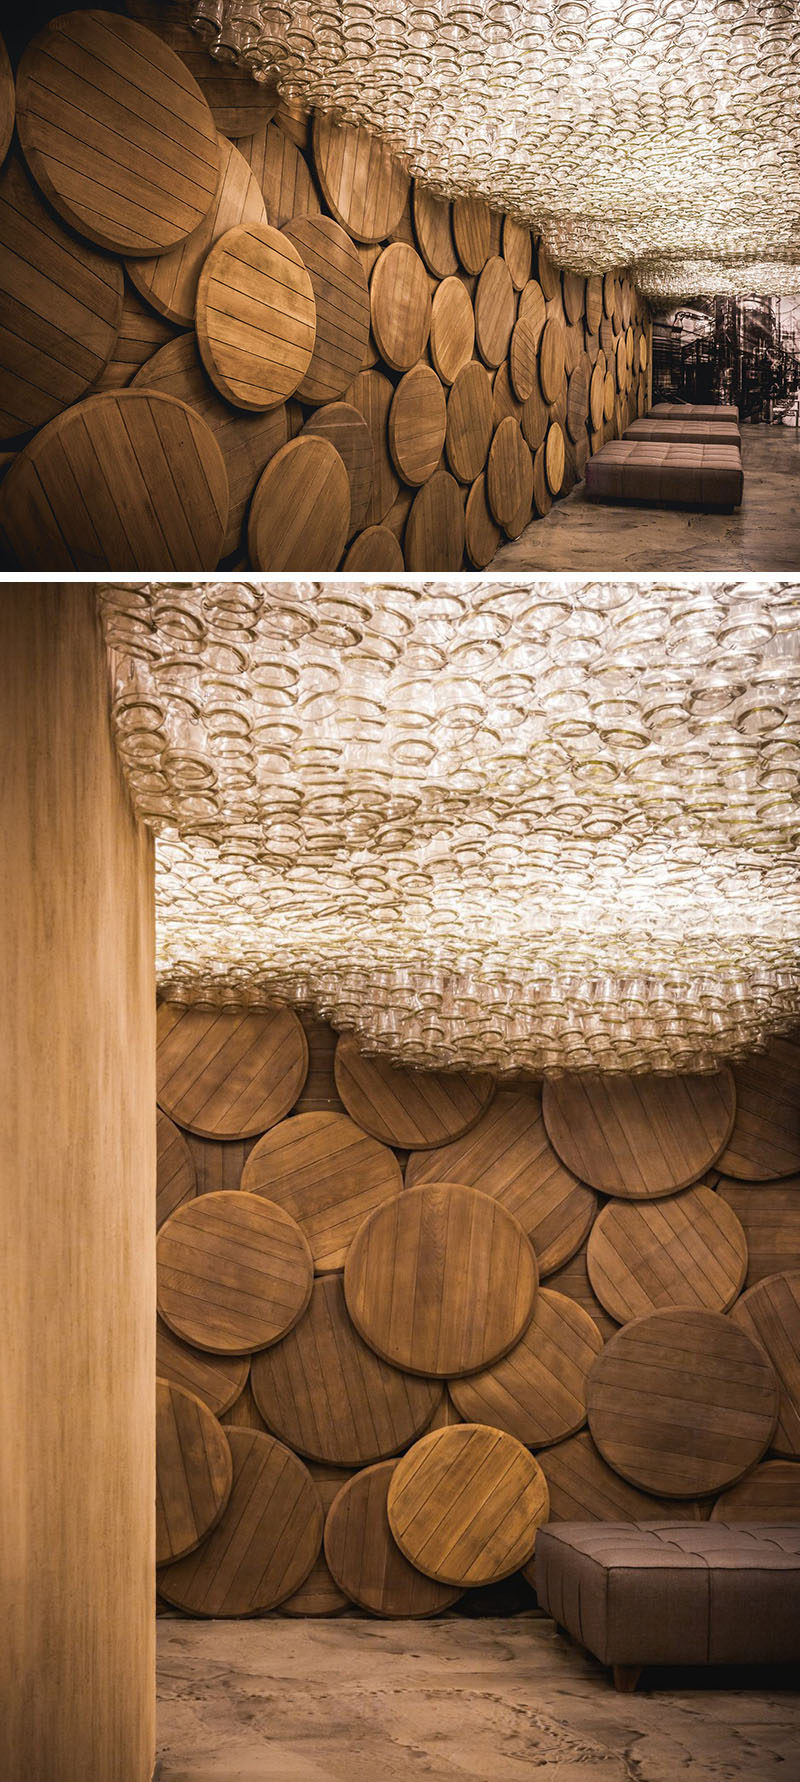 13 Amazing Examples Of Creative Sculptural Ceilings // Brandy bottles make up the ceiling of this brandy bar in Odessa, Ukraine.